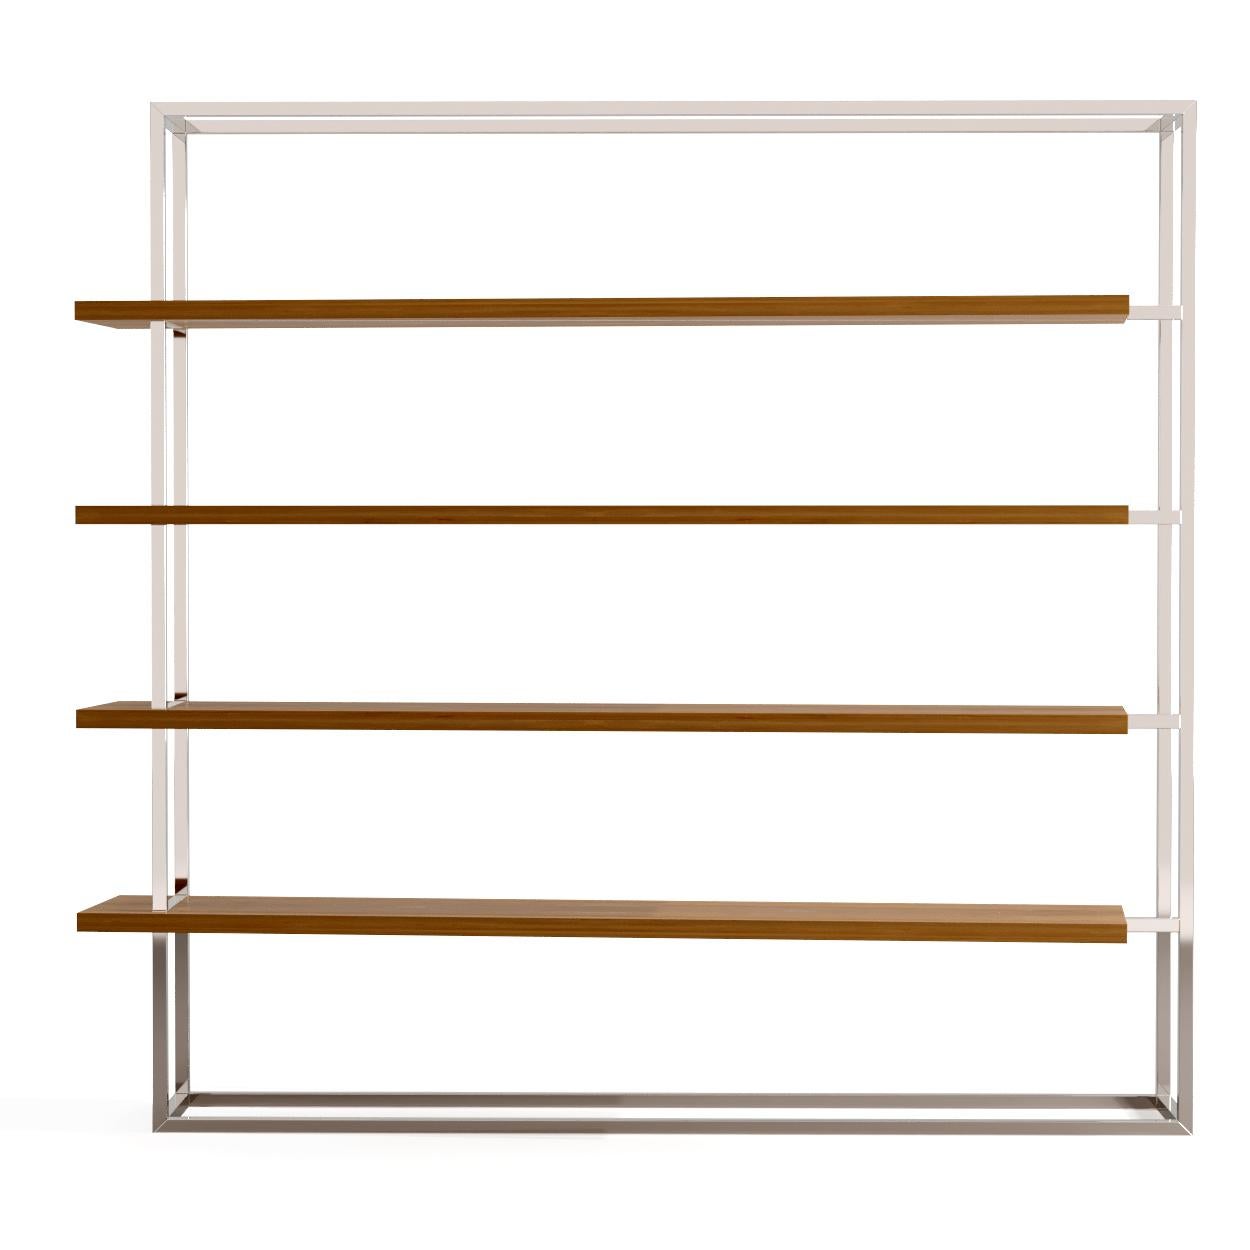 Portuguese Modern Minimalist Large Bookcase with Shelves Oak Wood Brushed Stainless Steel For Sale